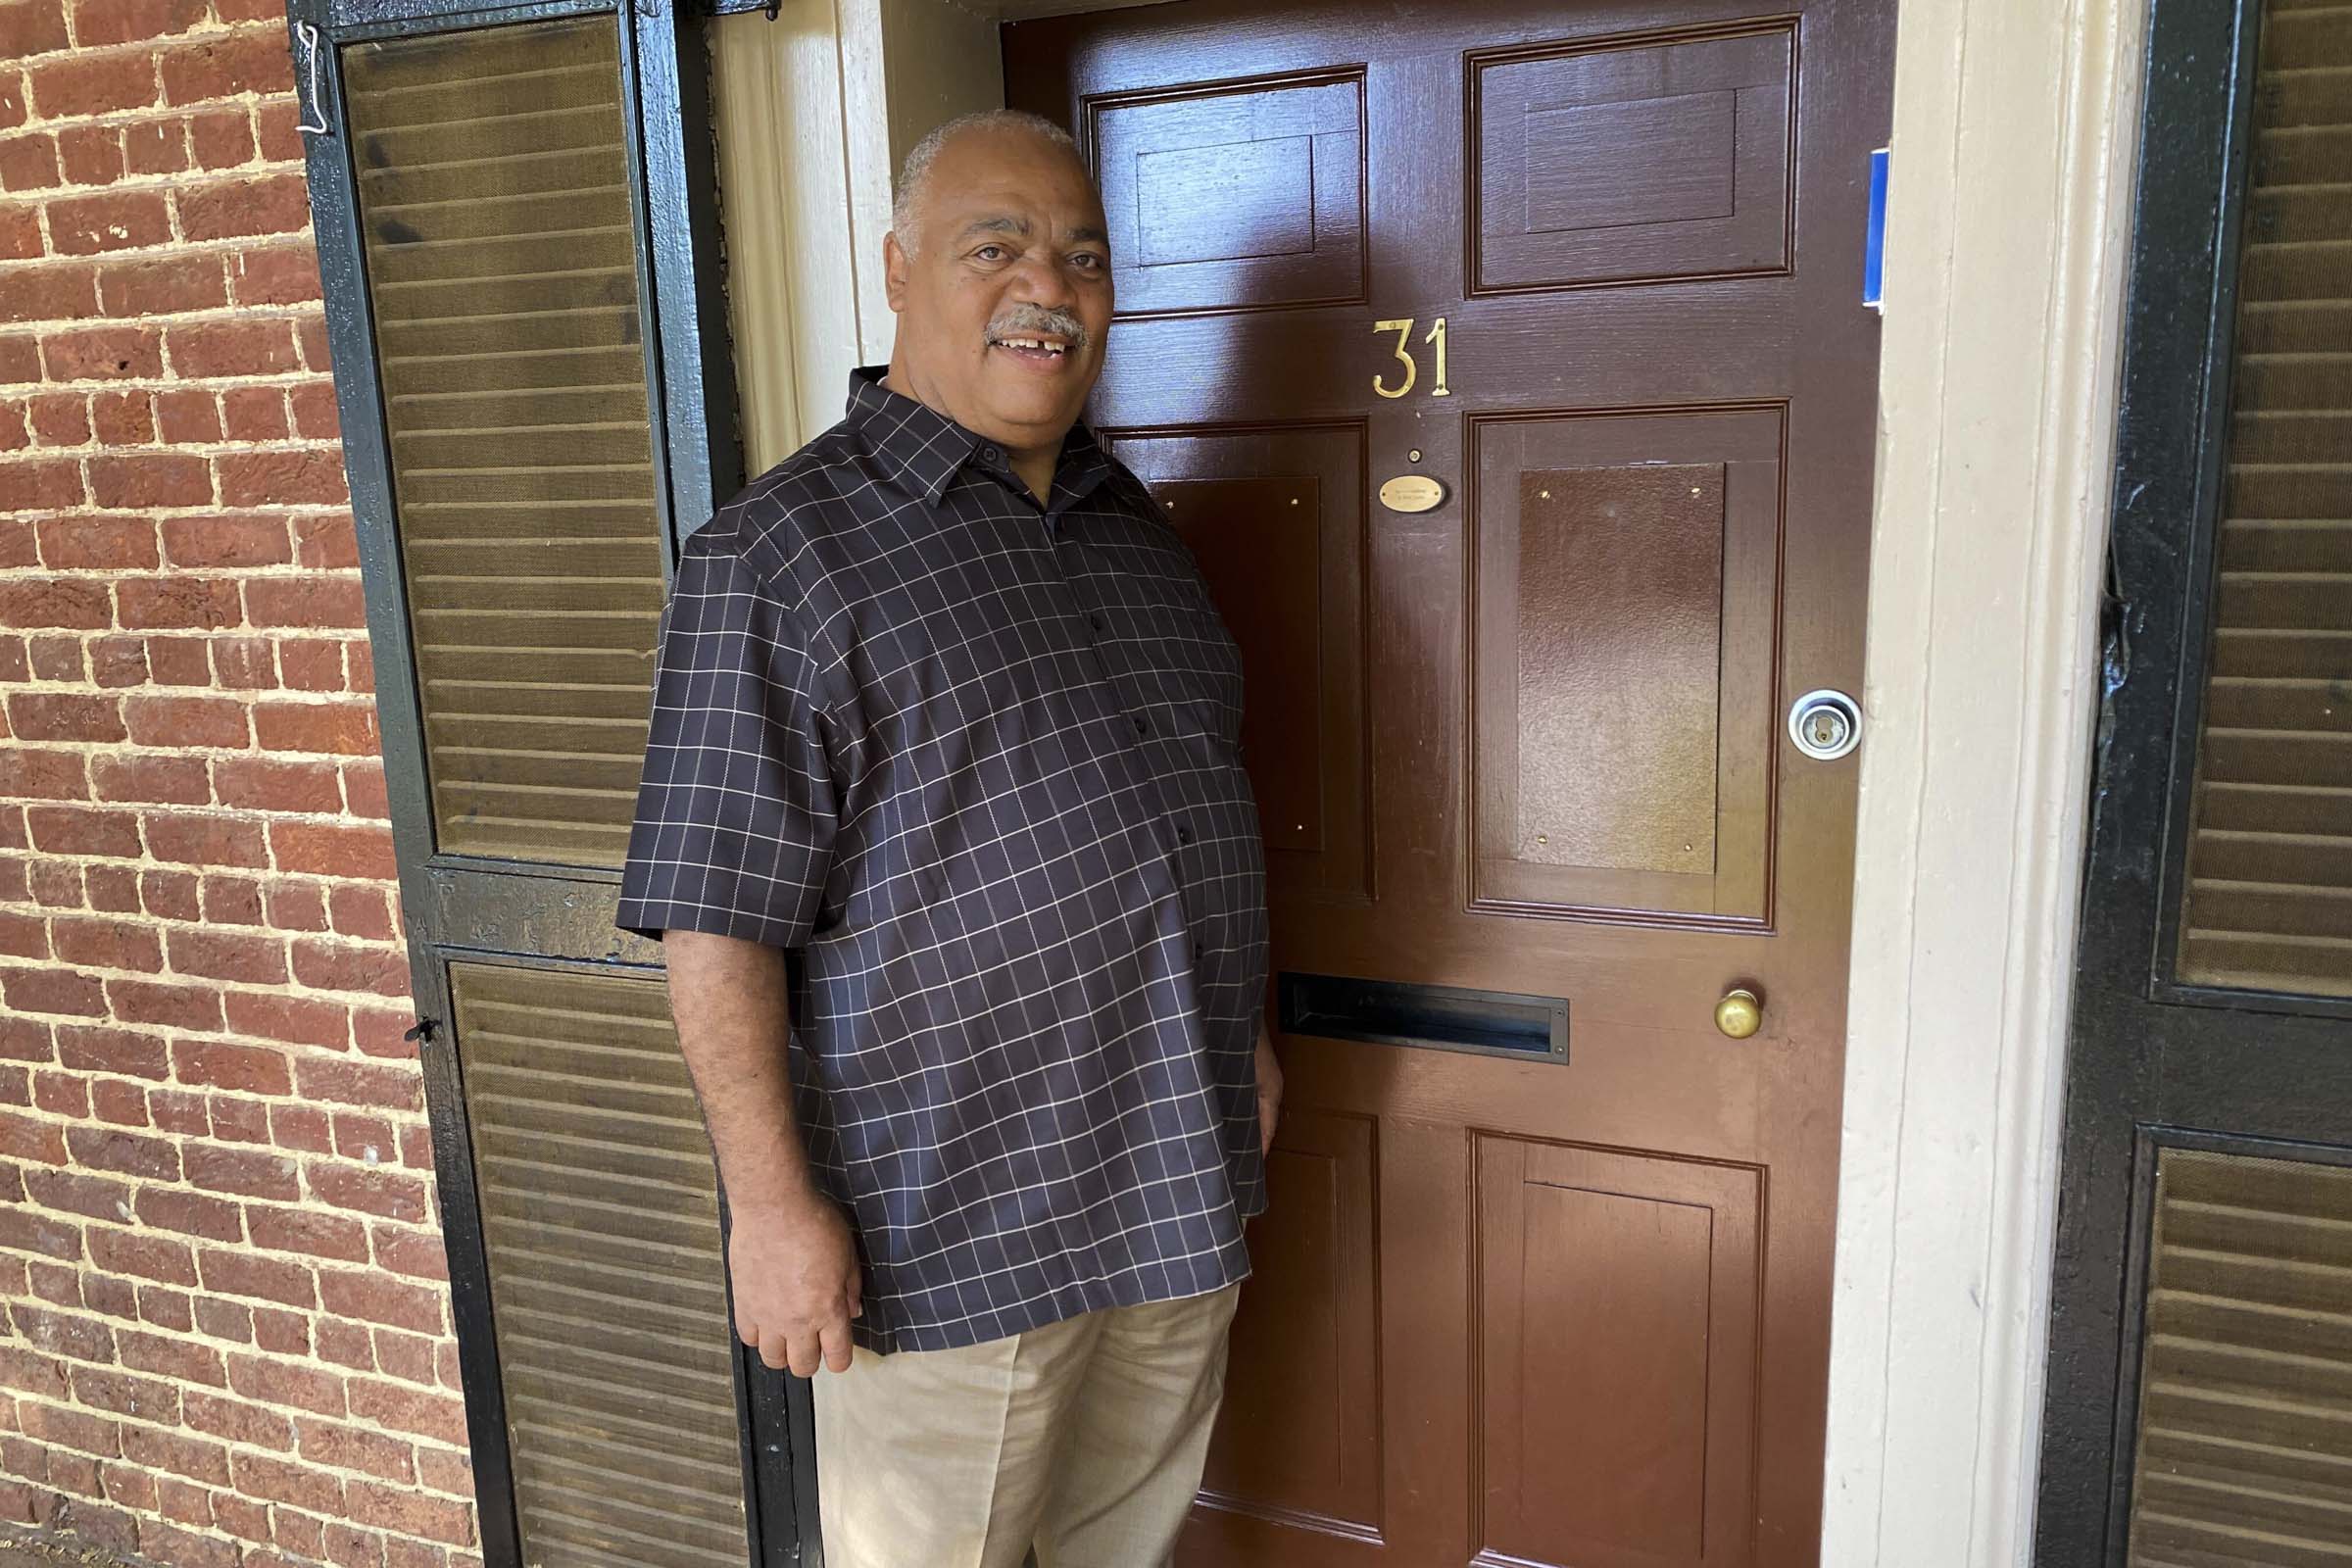 The father of a graduating student stands in front of the door to Lawn Room 31